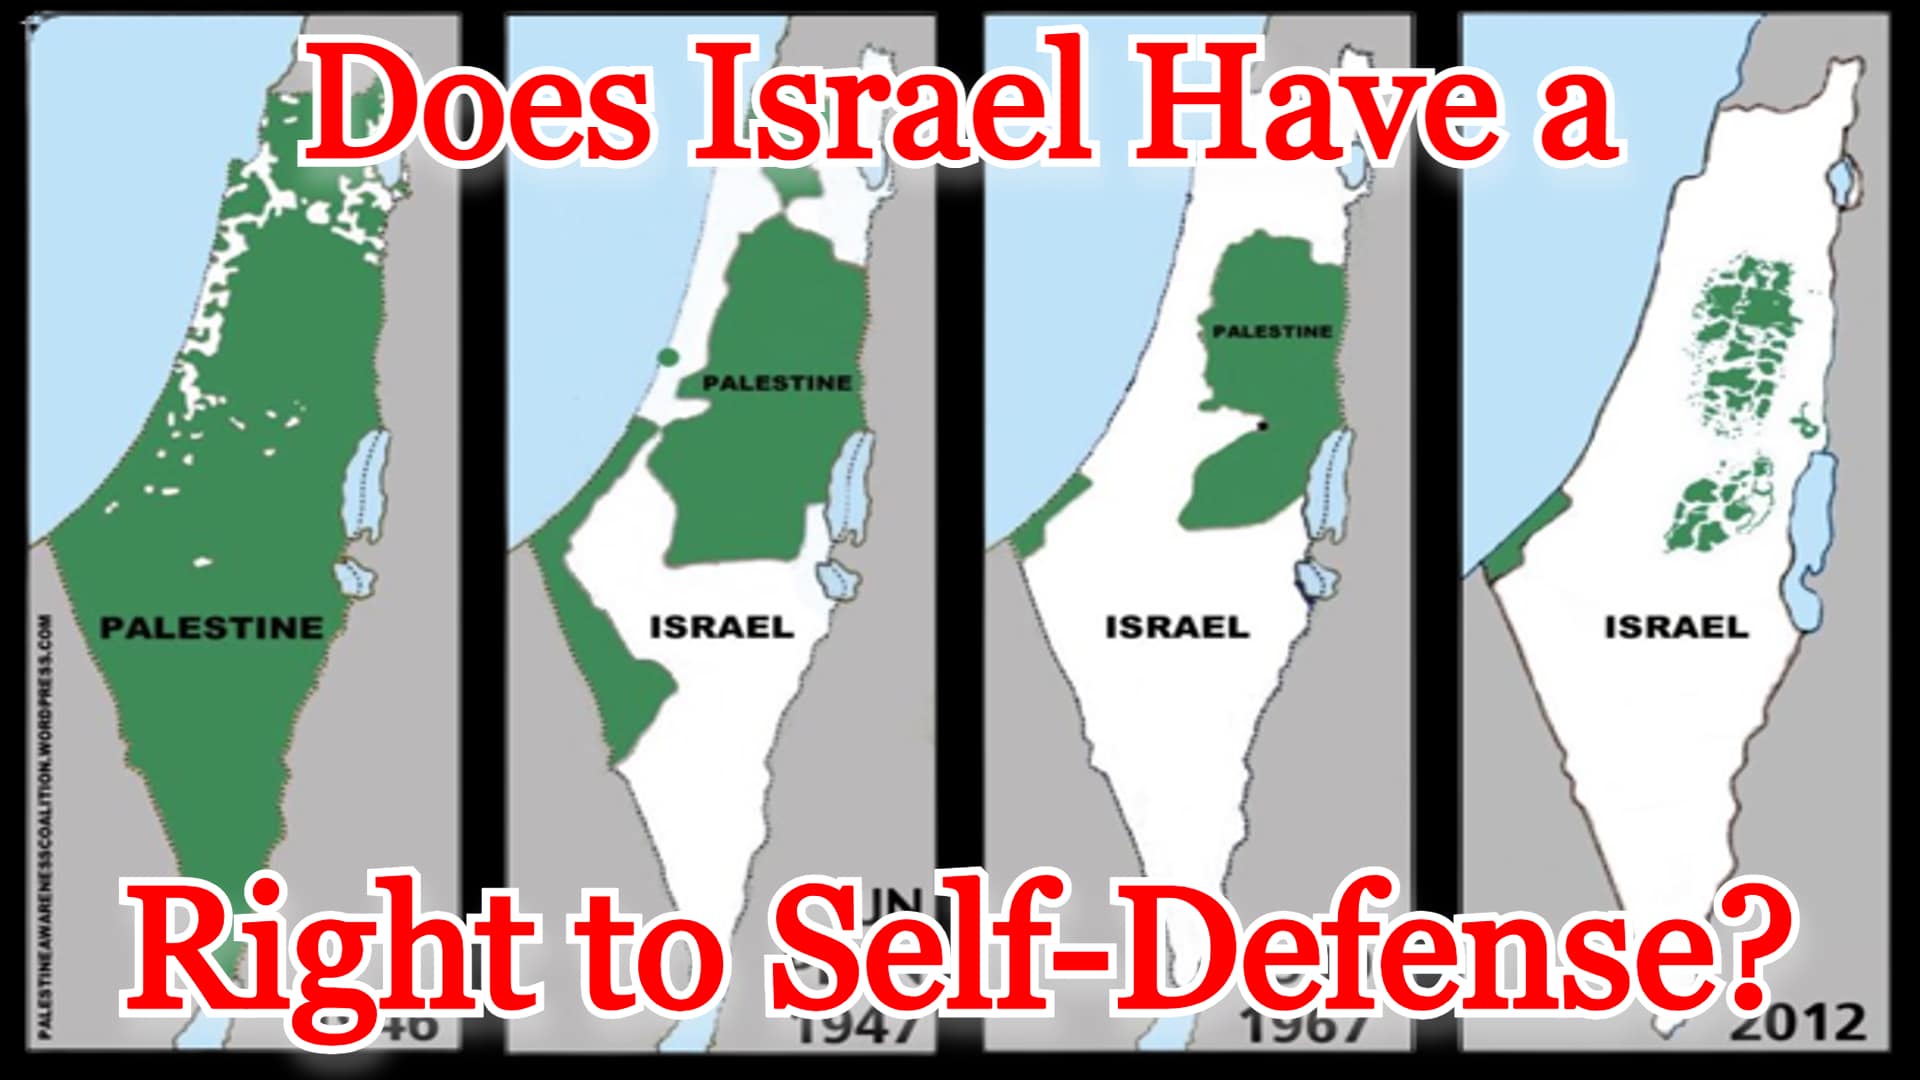 COI #482: Does Israel Have a Right to Self-Defense?